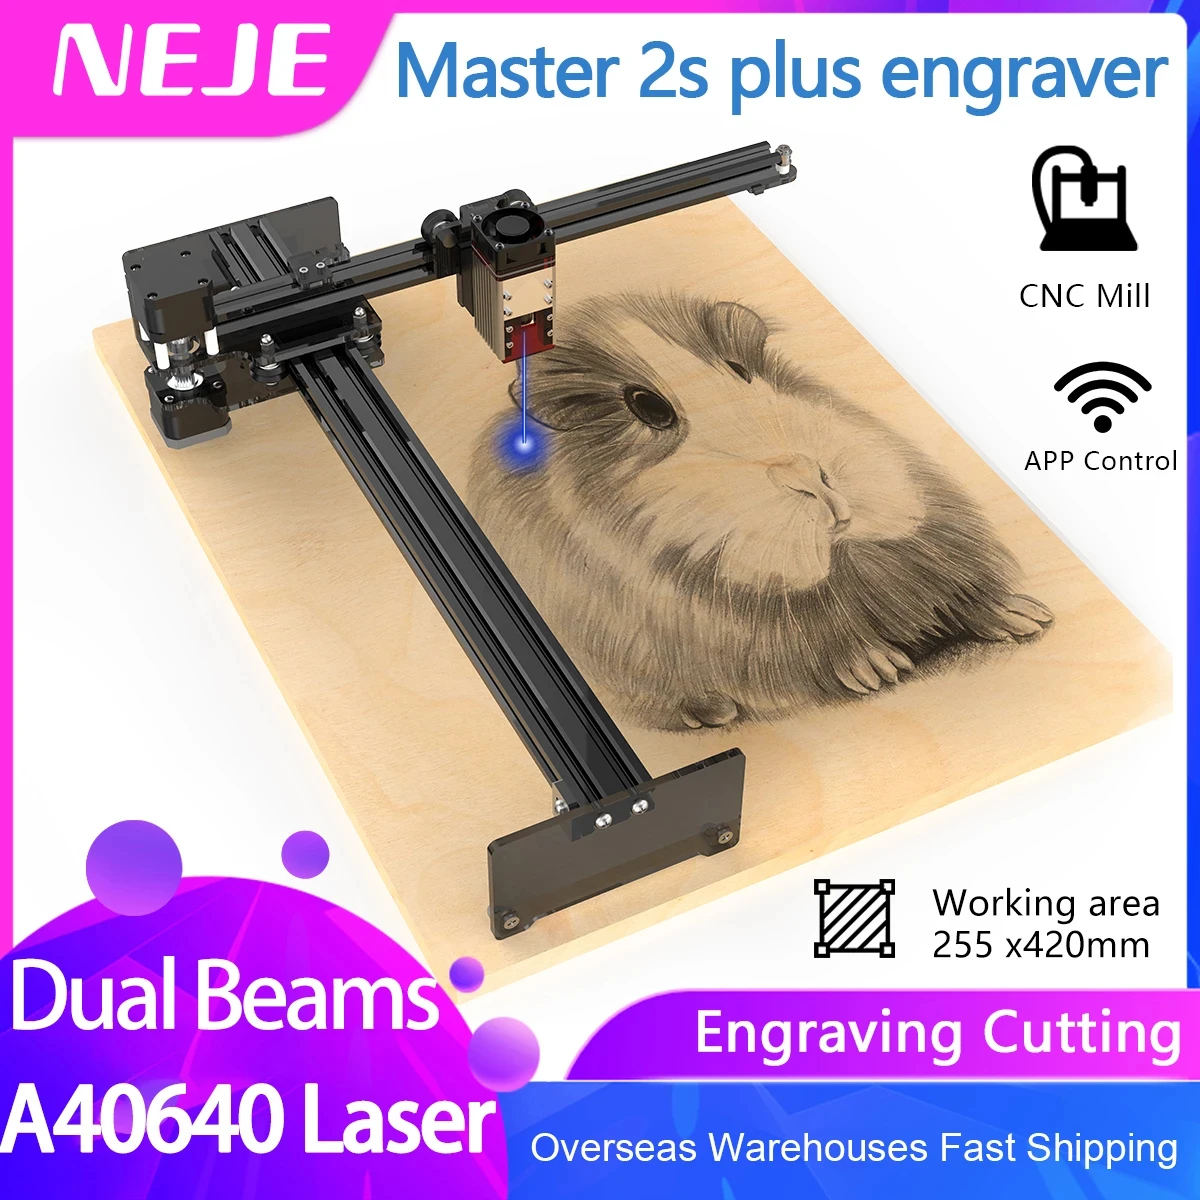 2022 NEJE 3 Plus Dual Beam Laser Engraver and Cutter, 255x420mm CNC Wood Router / Engraving / Cutting Machine enlarge